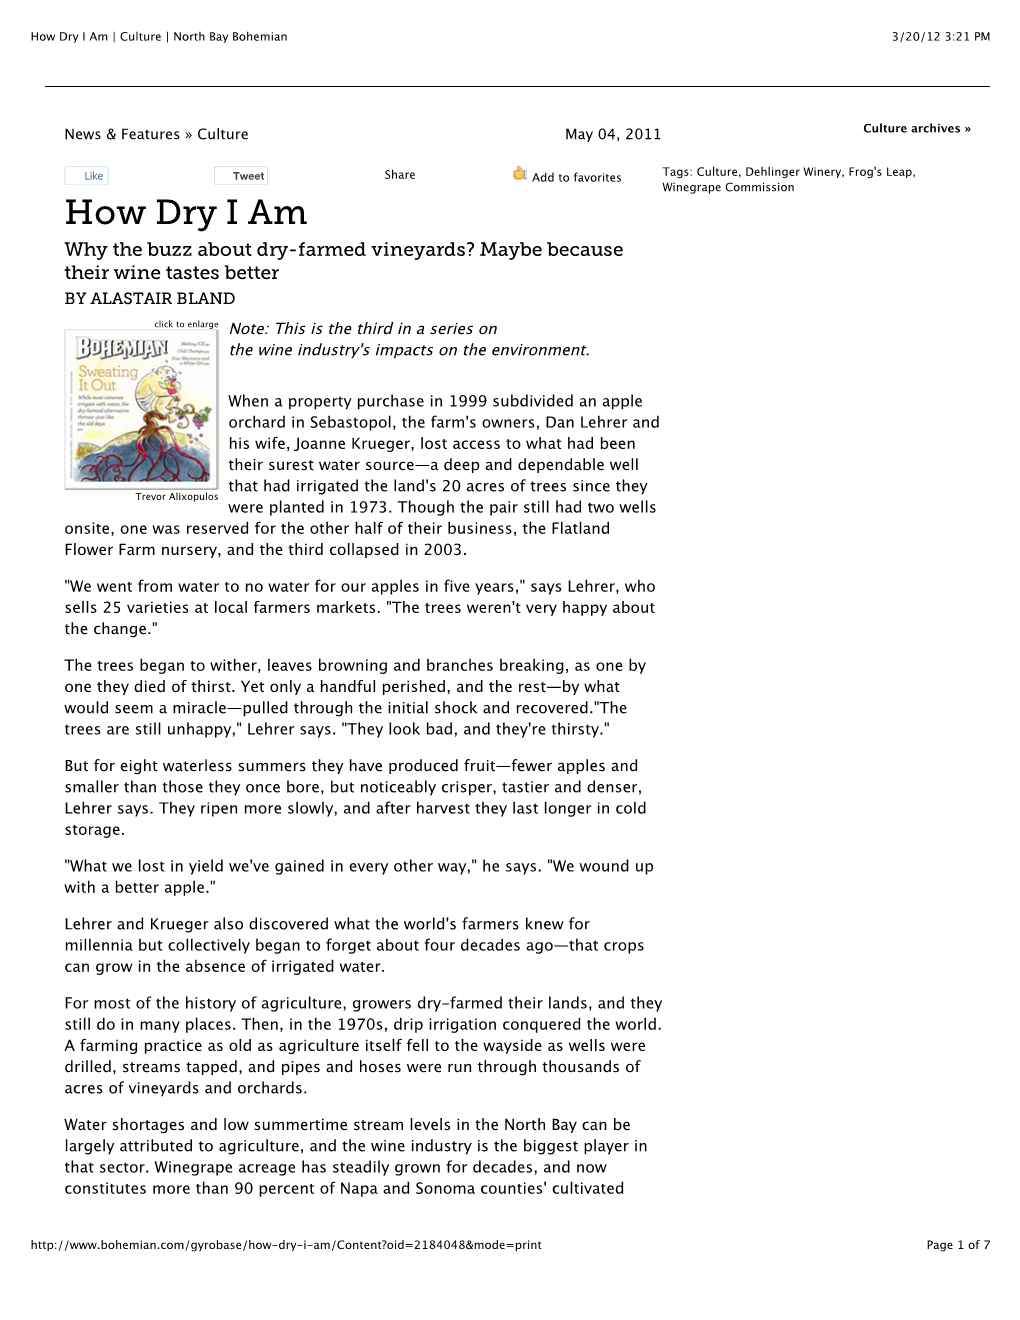 How Dry I Am | Culture | North Bay Bohemian 3/20/12 3:21 PM